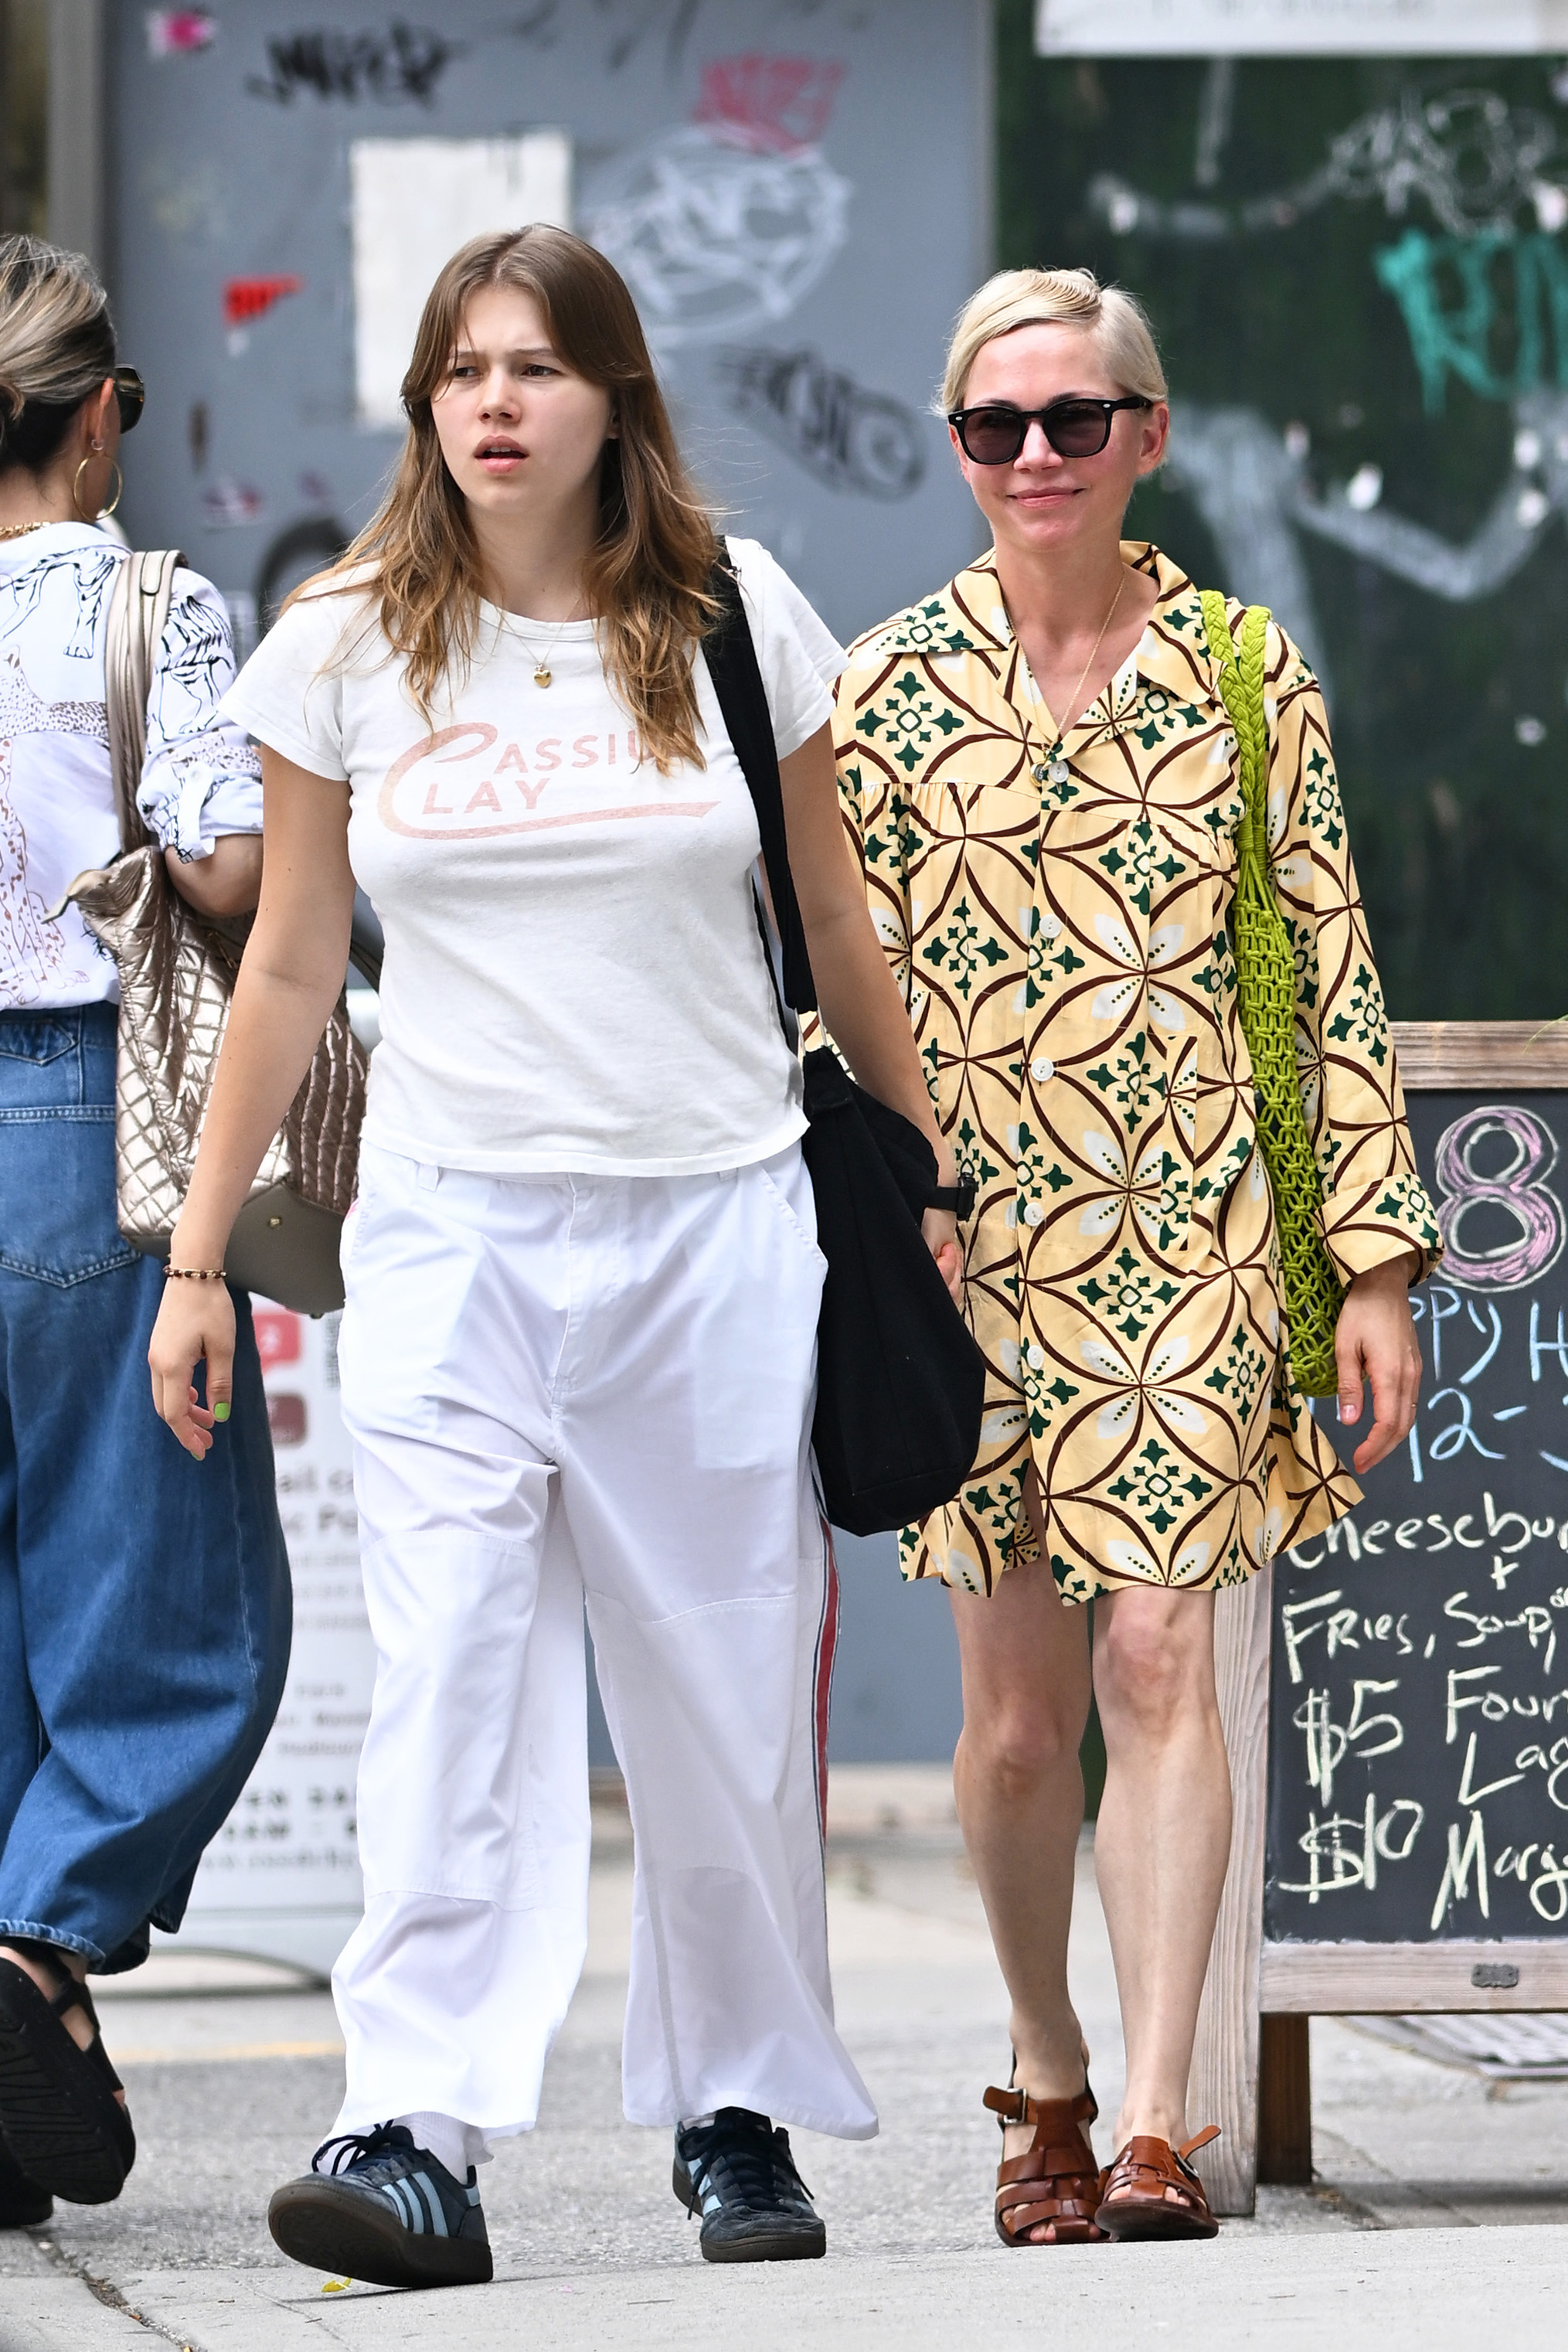 Matilda Ledger has stayed out of the spotlight, only occasionally appearing in public with mom Michelle Williams through the years